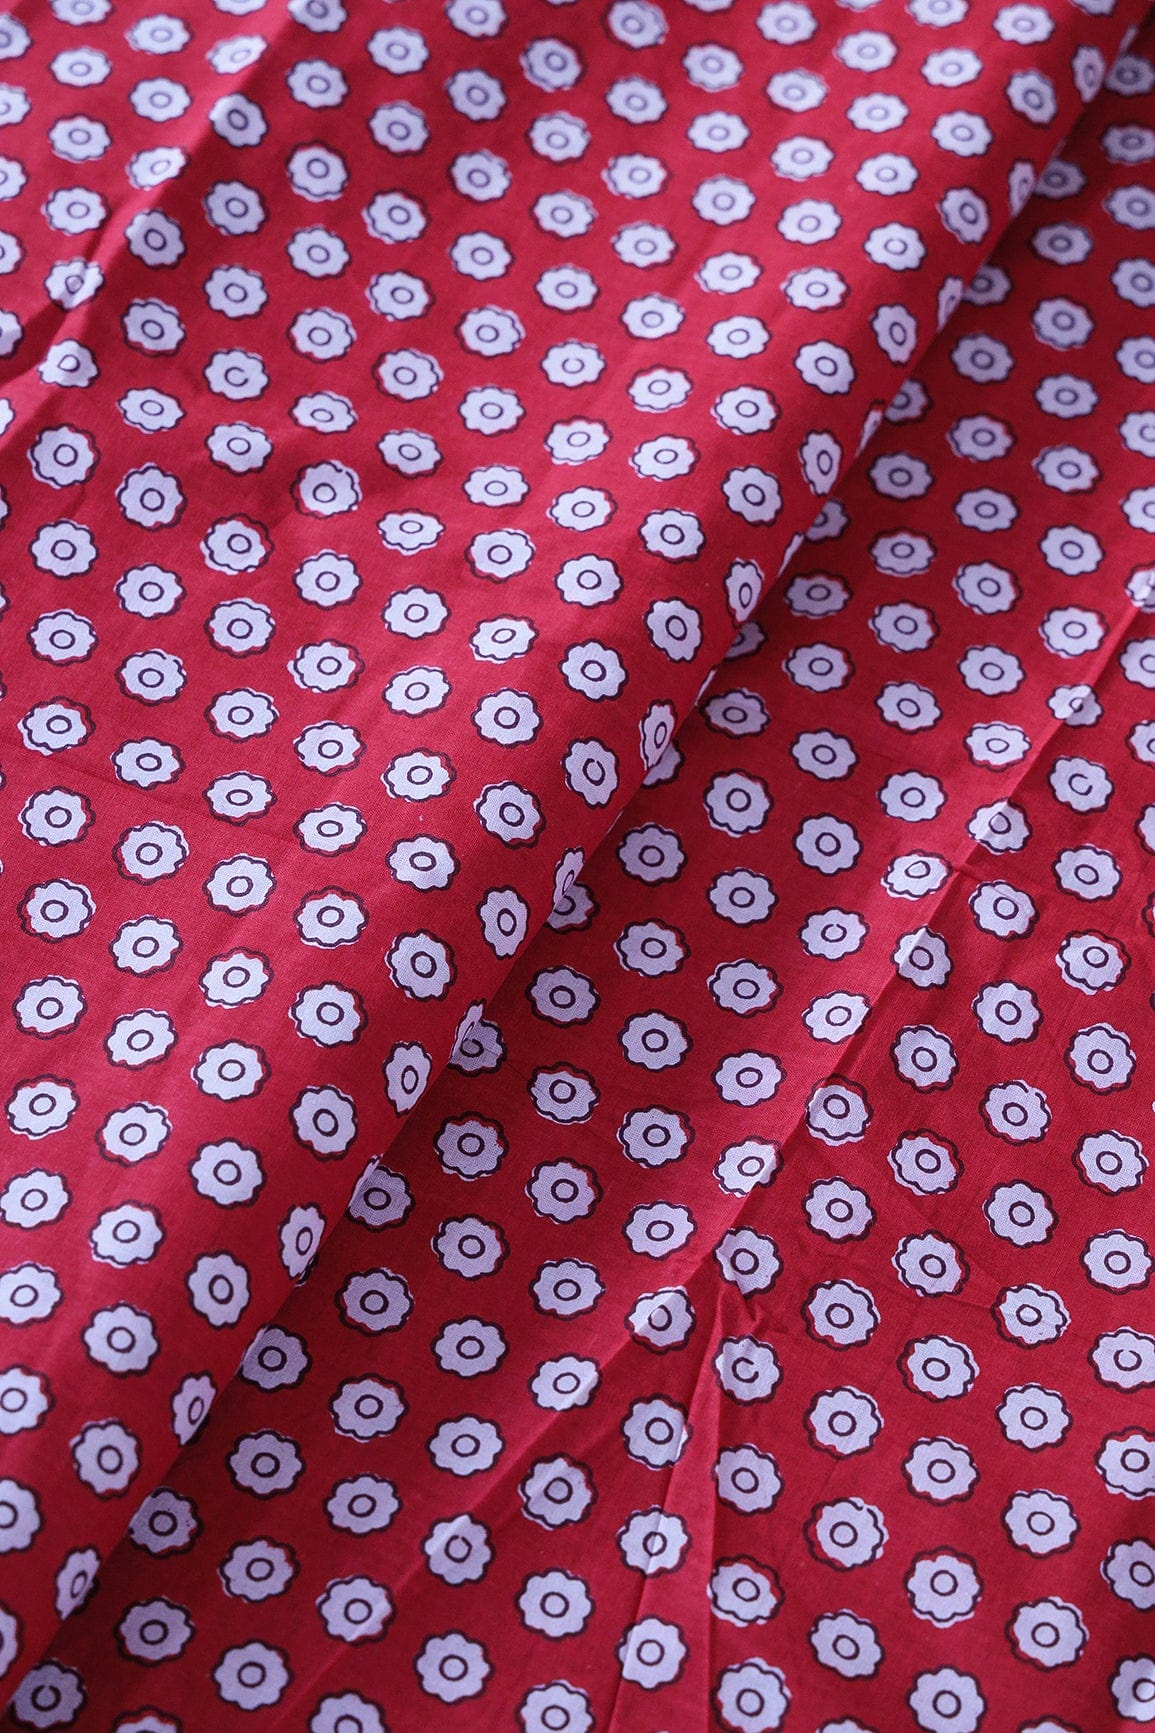 doeraa Prints White Small Floral Booti Pattern Print On Red Pure Cotton Fabric